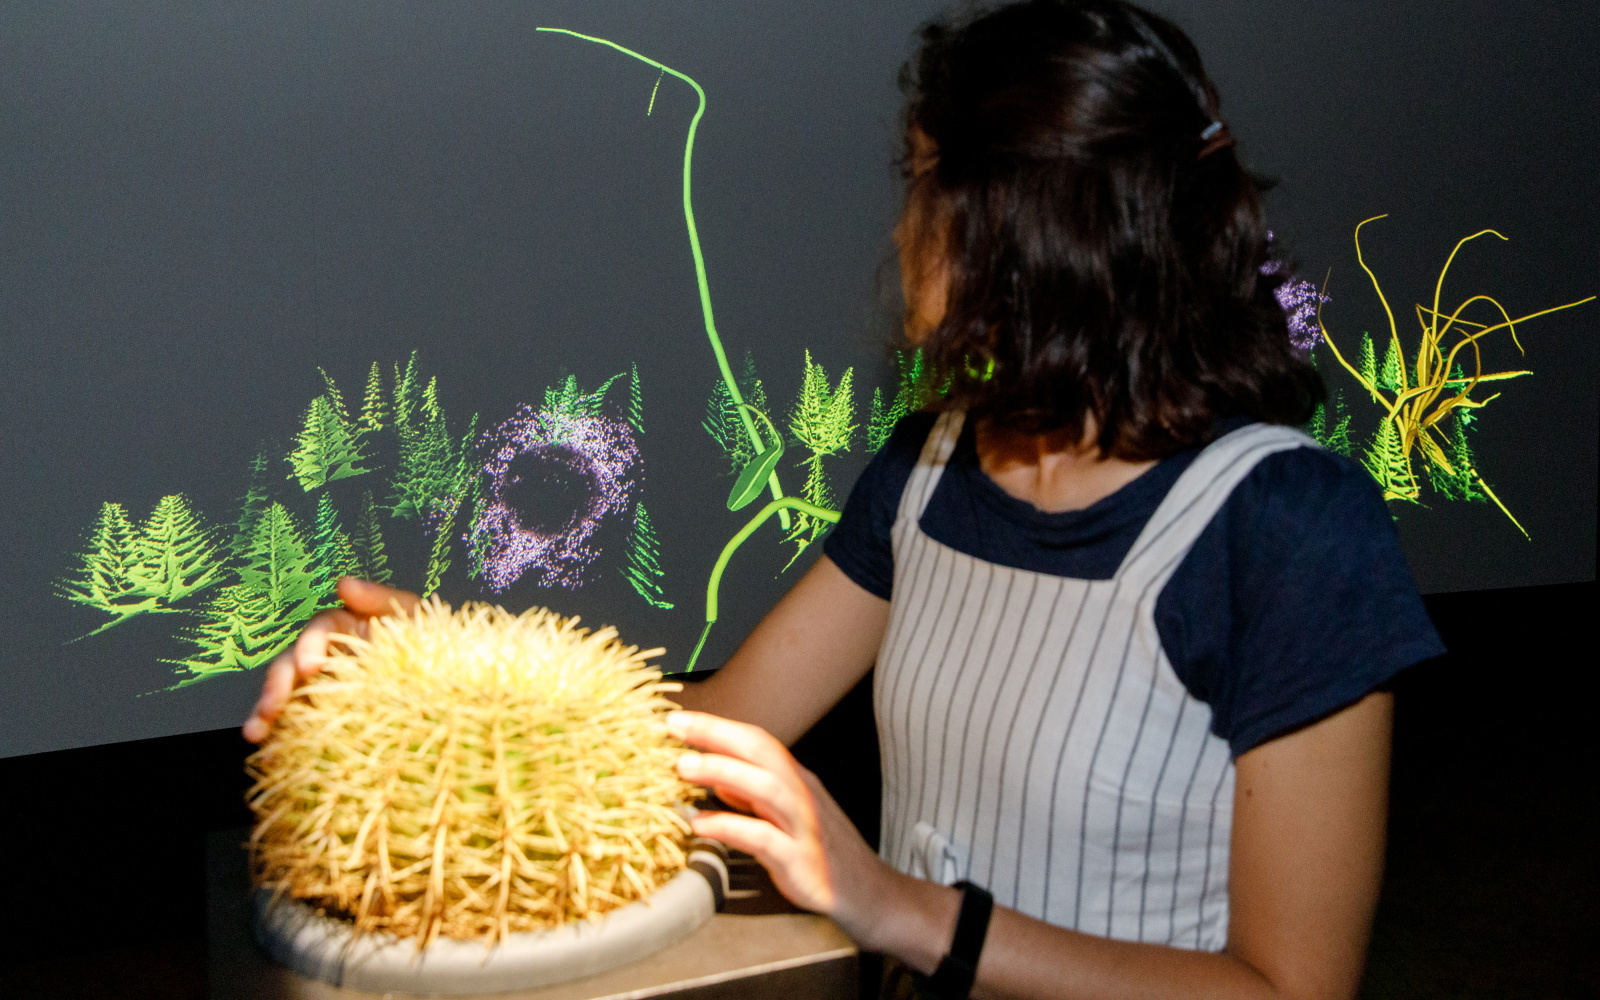 A young woman touches a plant while looking at a projection with plants on a wall next to it.